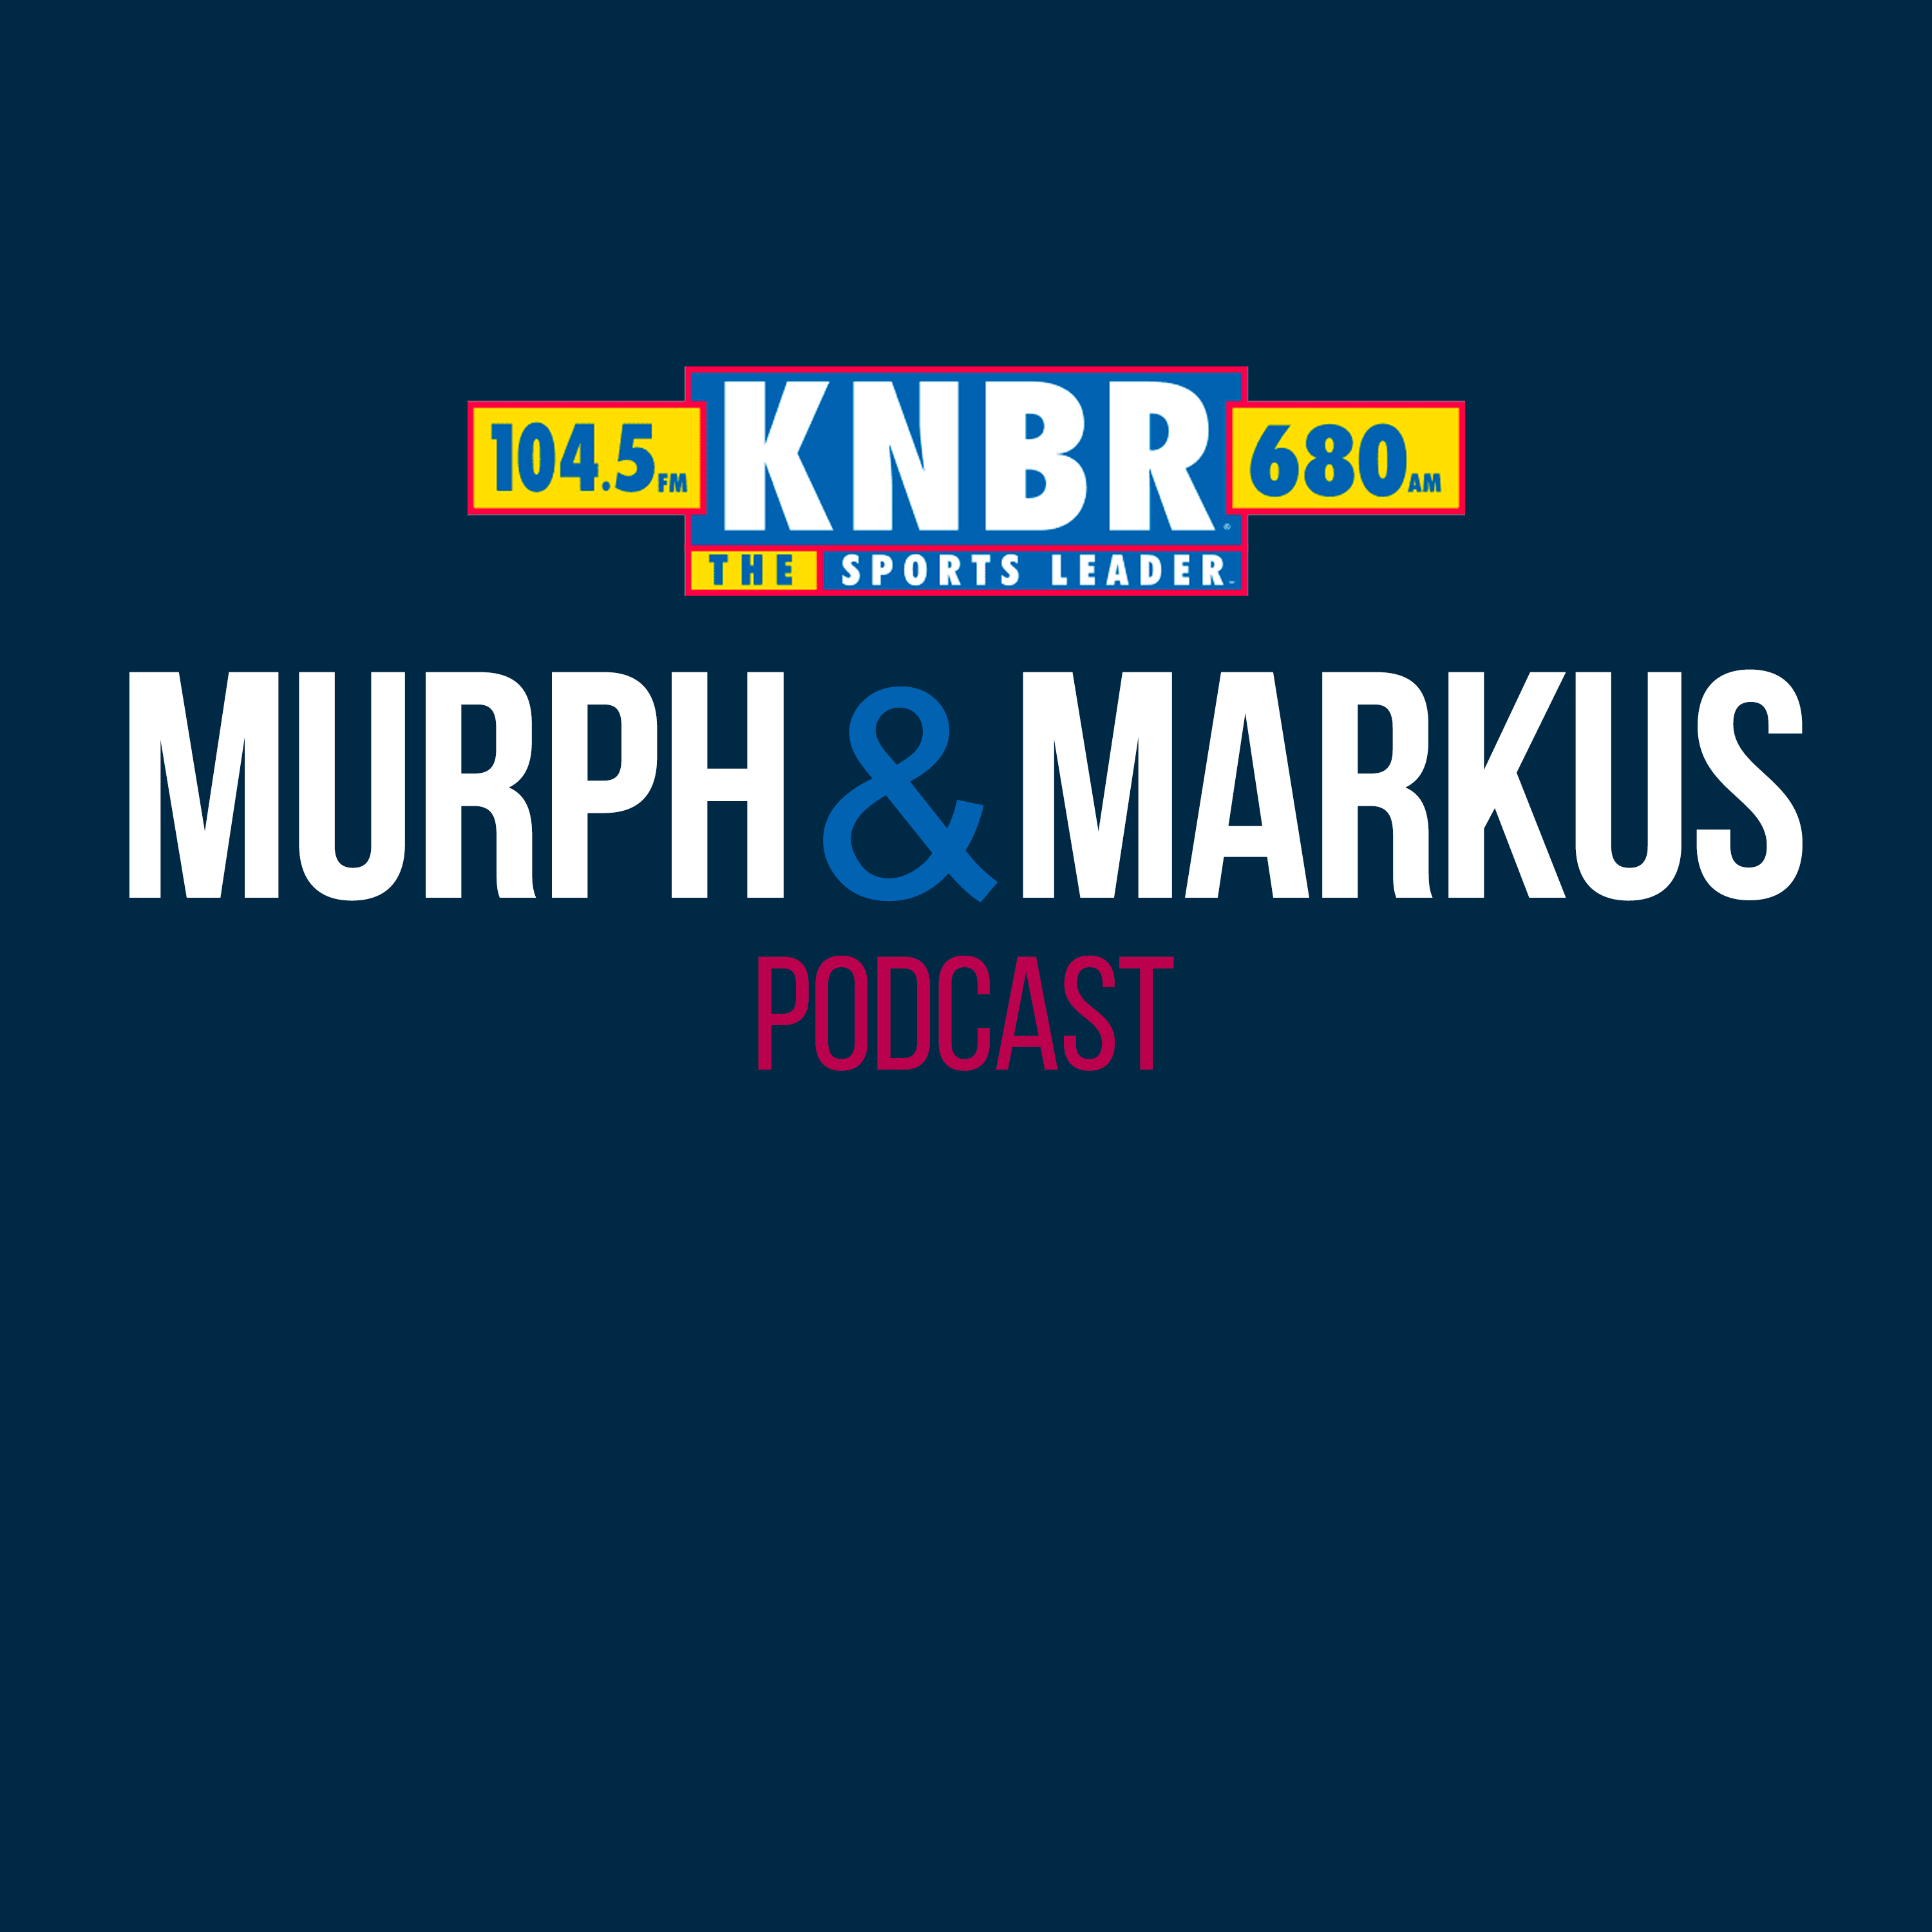 5/22 Mike Krukow joined Murph and Markus to discuss the Giants rough loss and how this team can rebound moving forward